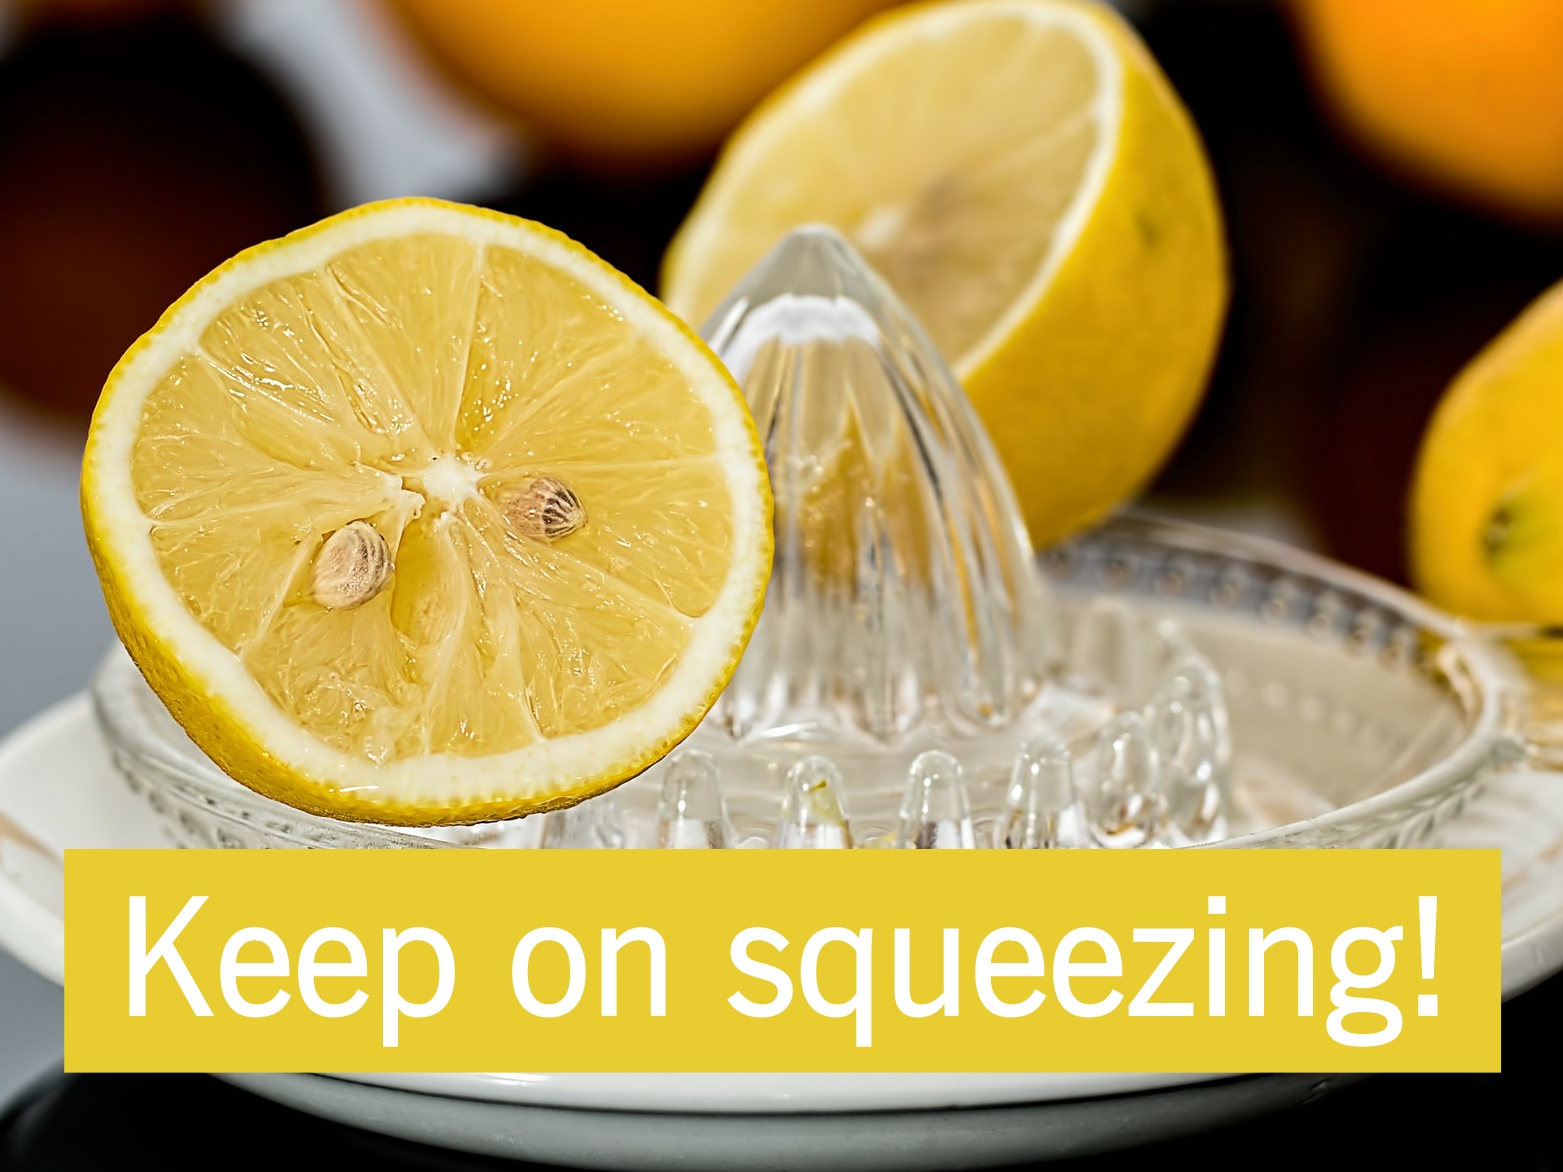 ADVICE: Keep on squeezing!